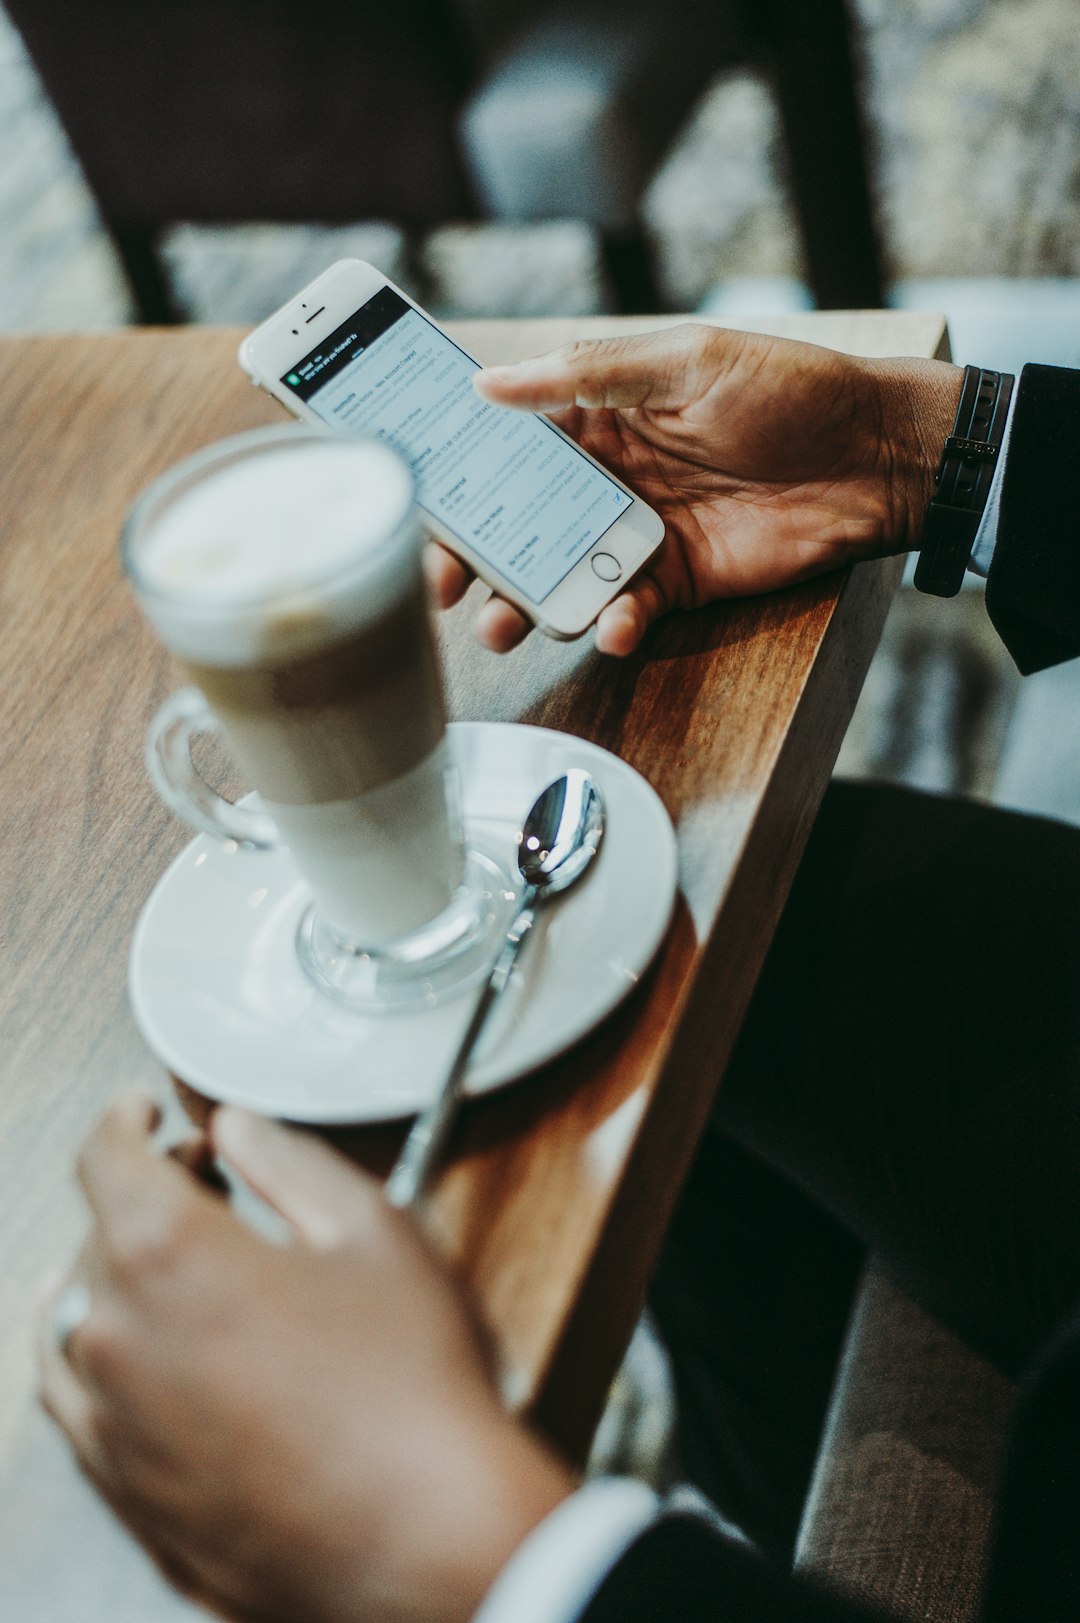 A man in a suit using an iPhone while sitting over a tall coffee